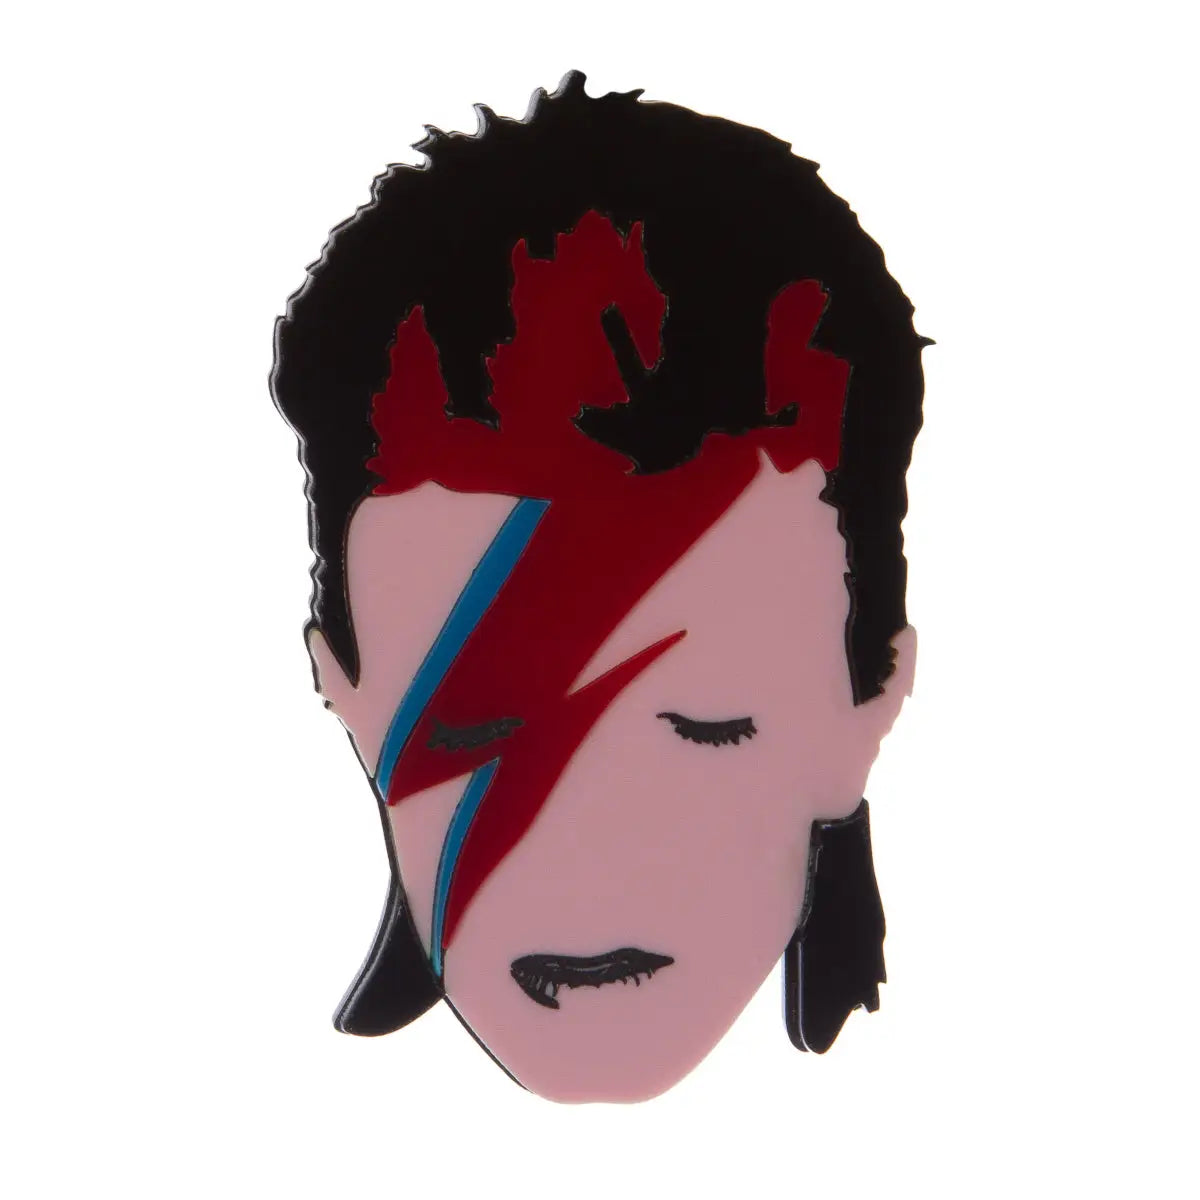 A laser-cut and hand assembled layered acrylic brooch featuring the stylized face of David Bowie’s iconic 1973 persona Aladdin Sane